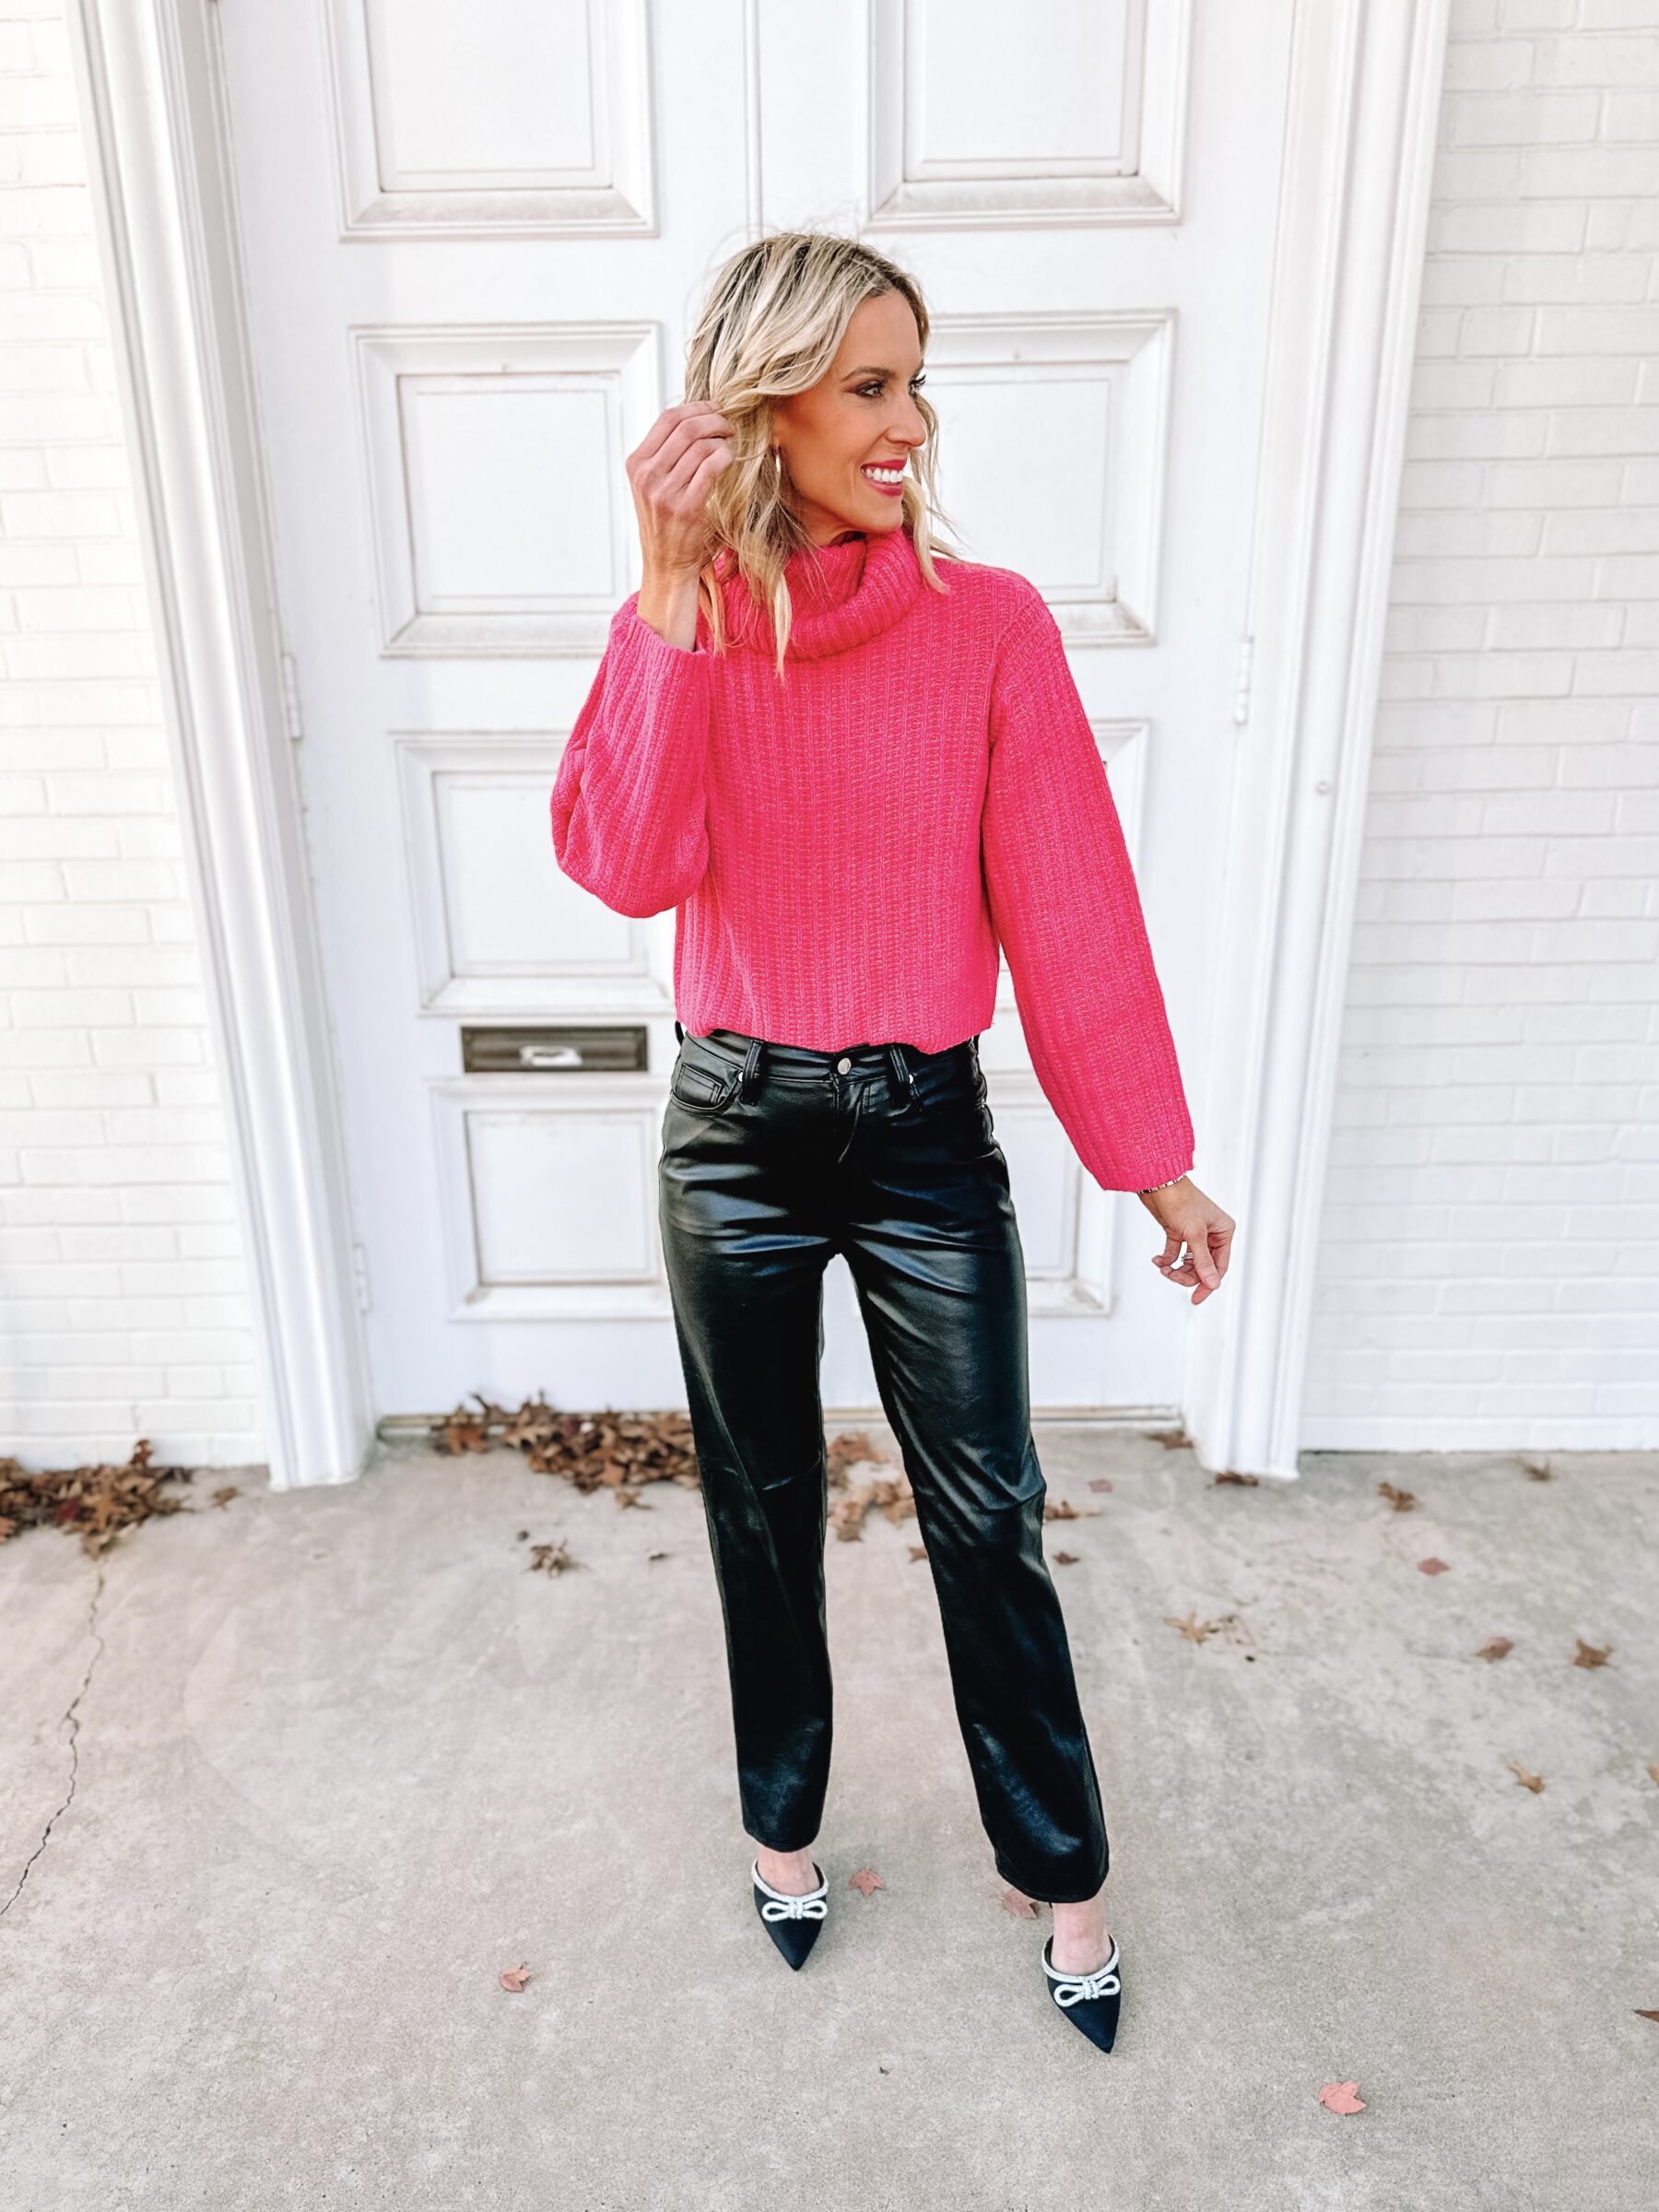 Target Leather Pants Outfit - Straight A Style